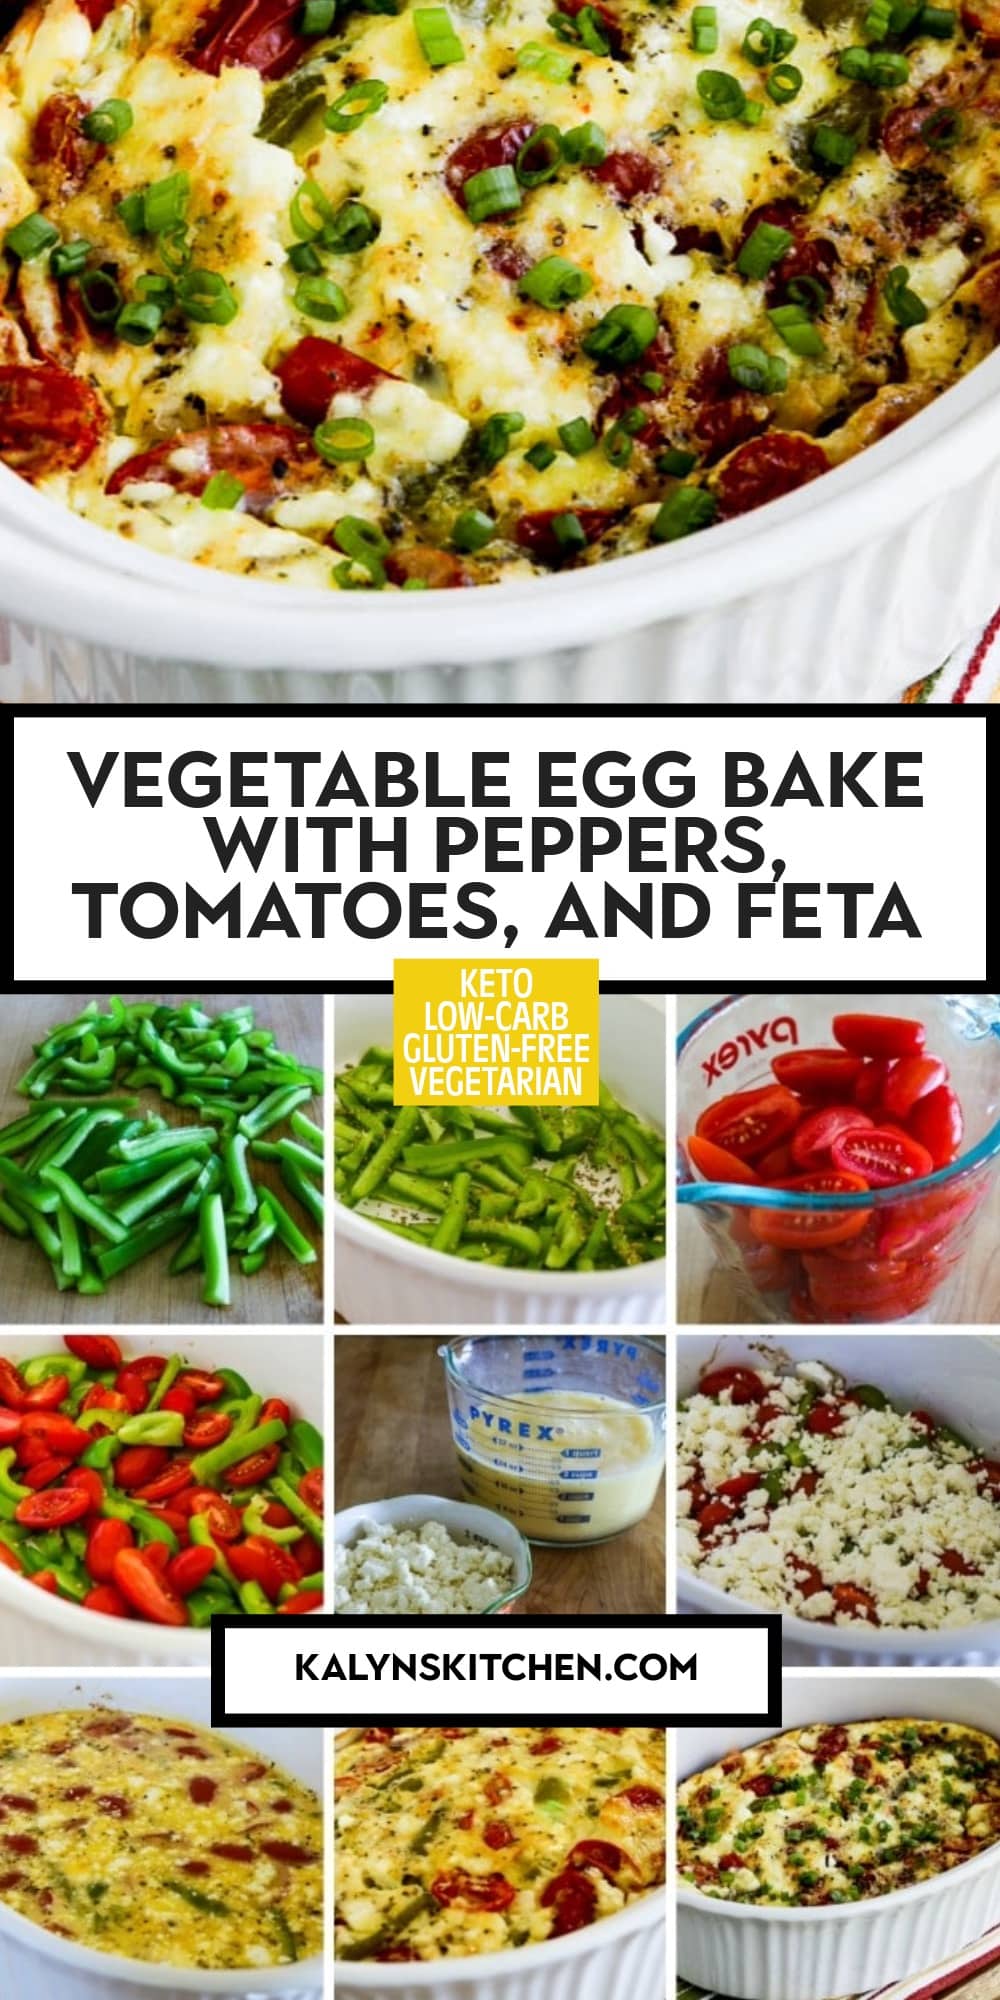 Pinterest image of Vegetable Egg Bake with Peppers, Tomatoes, and Feta